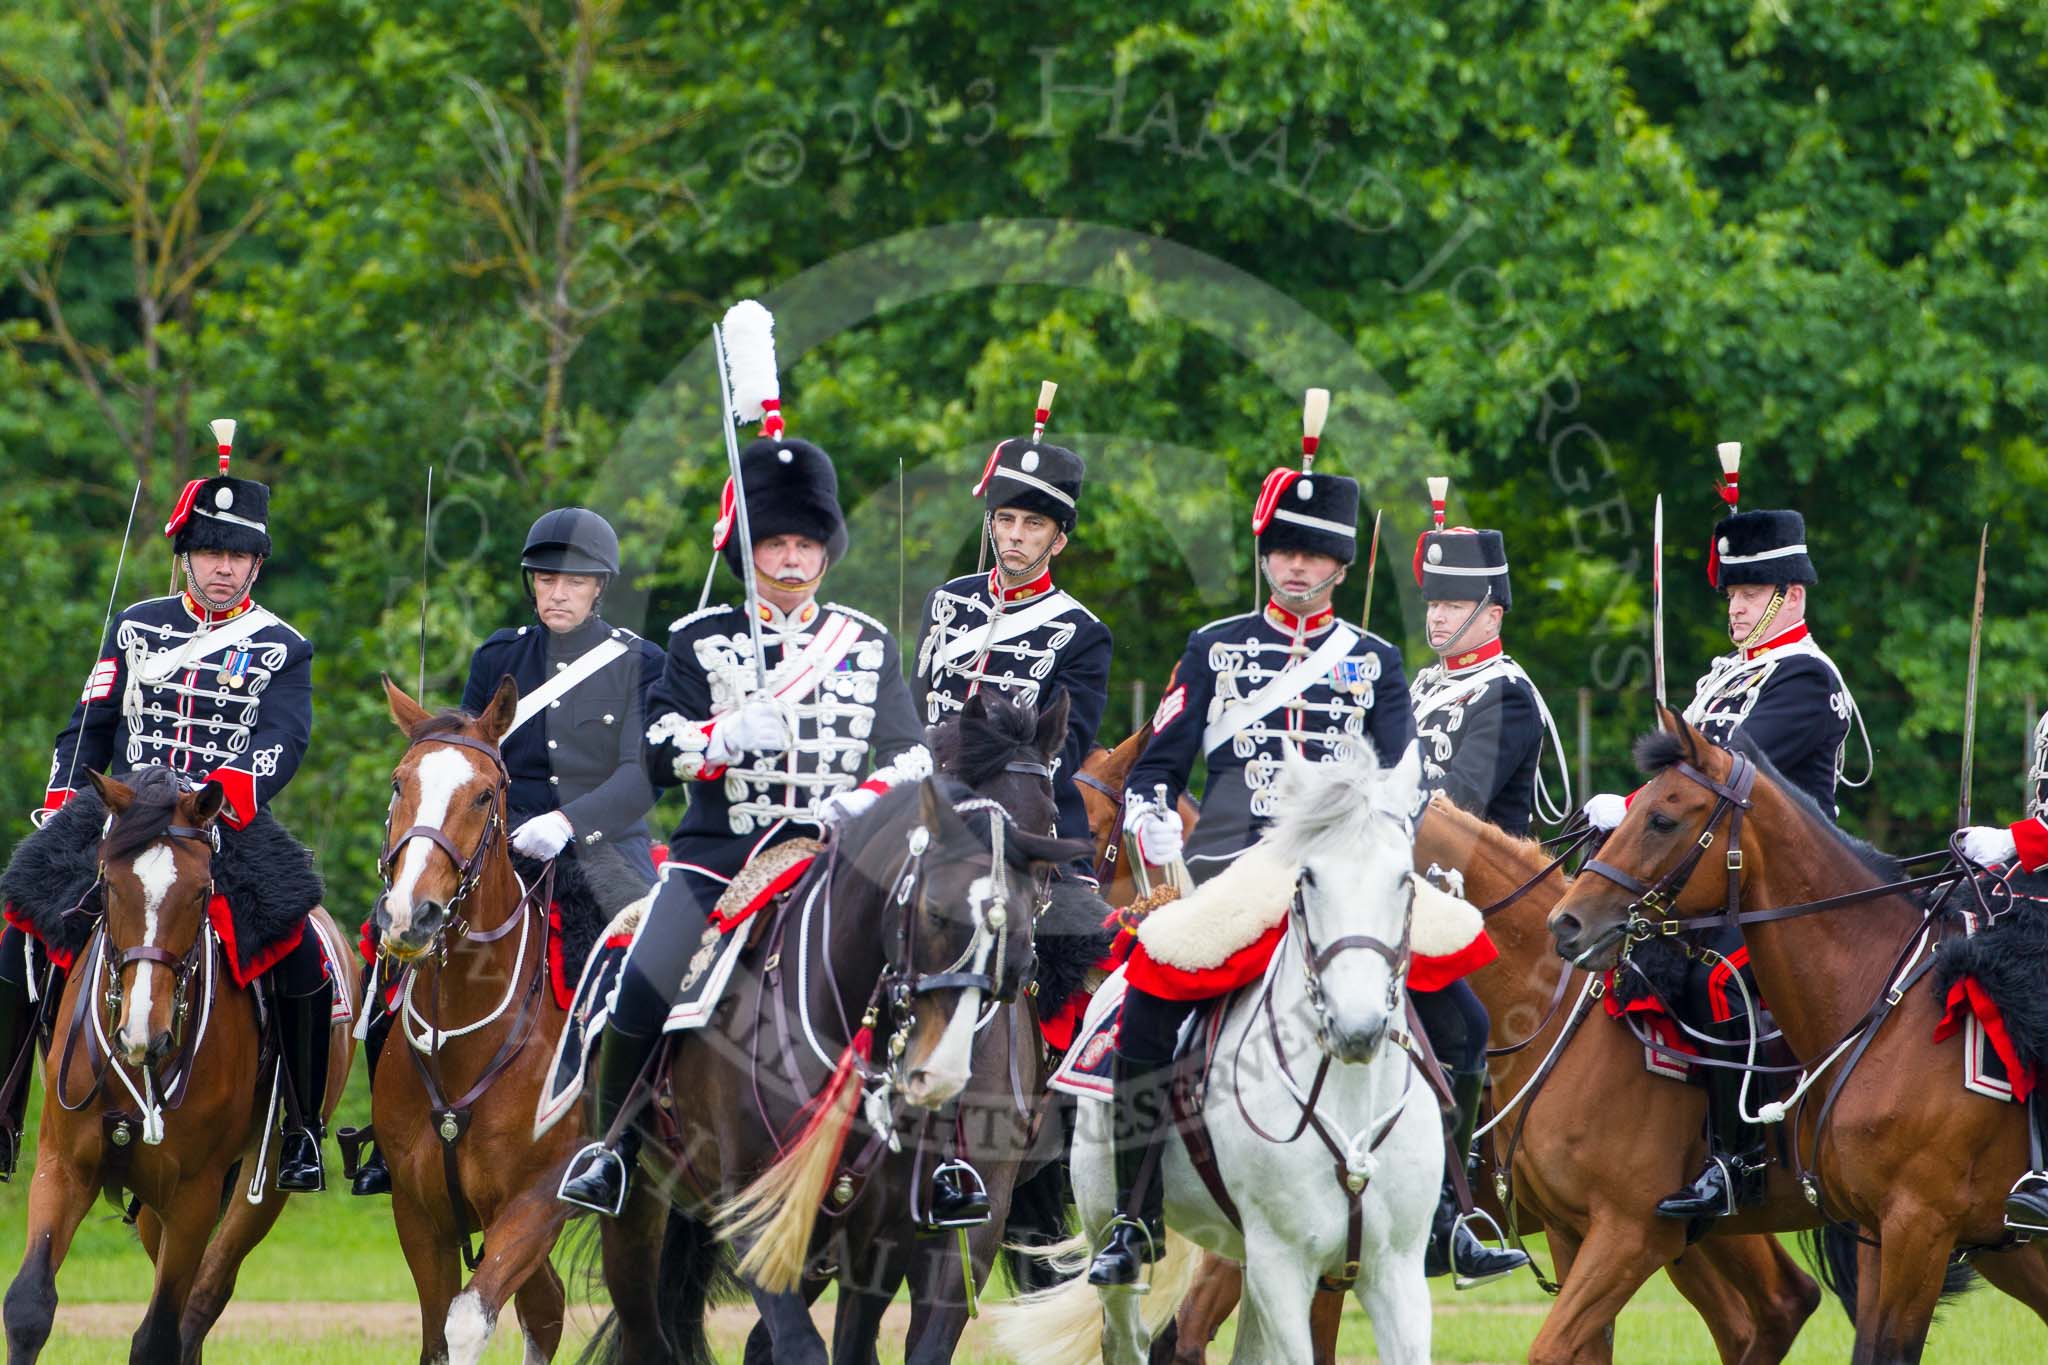 The Light Cavalry HAC Annual Review and Inspection 2013.
Windsor Great Park Review Ground,
Windsor,
Berkshire,
United Kingdom,
on 09 June 2013 at 13:35, image #442